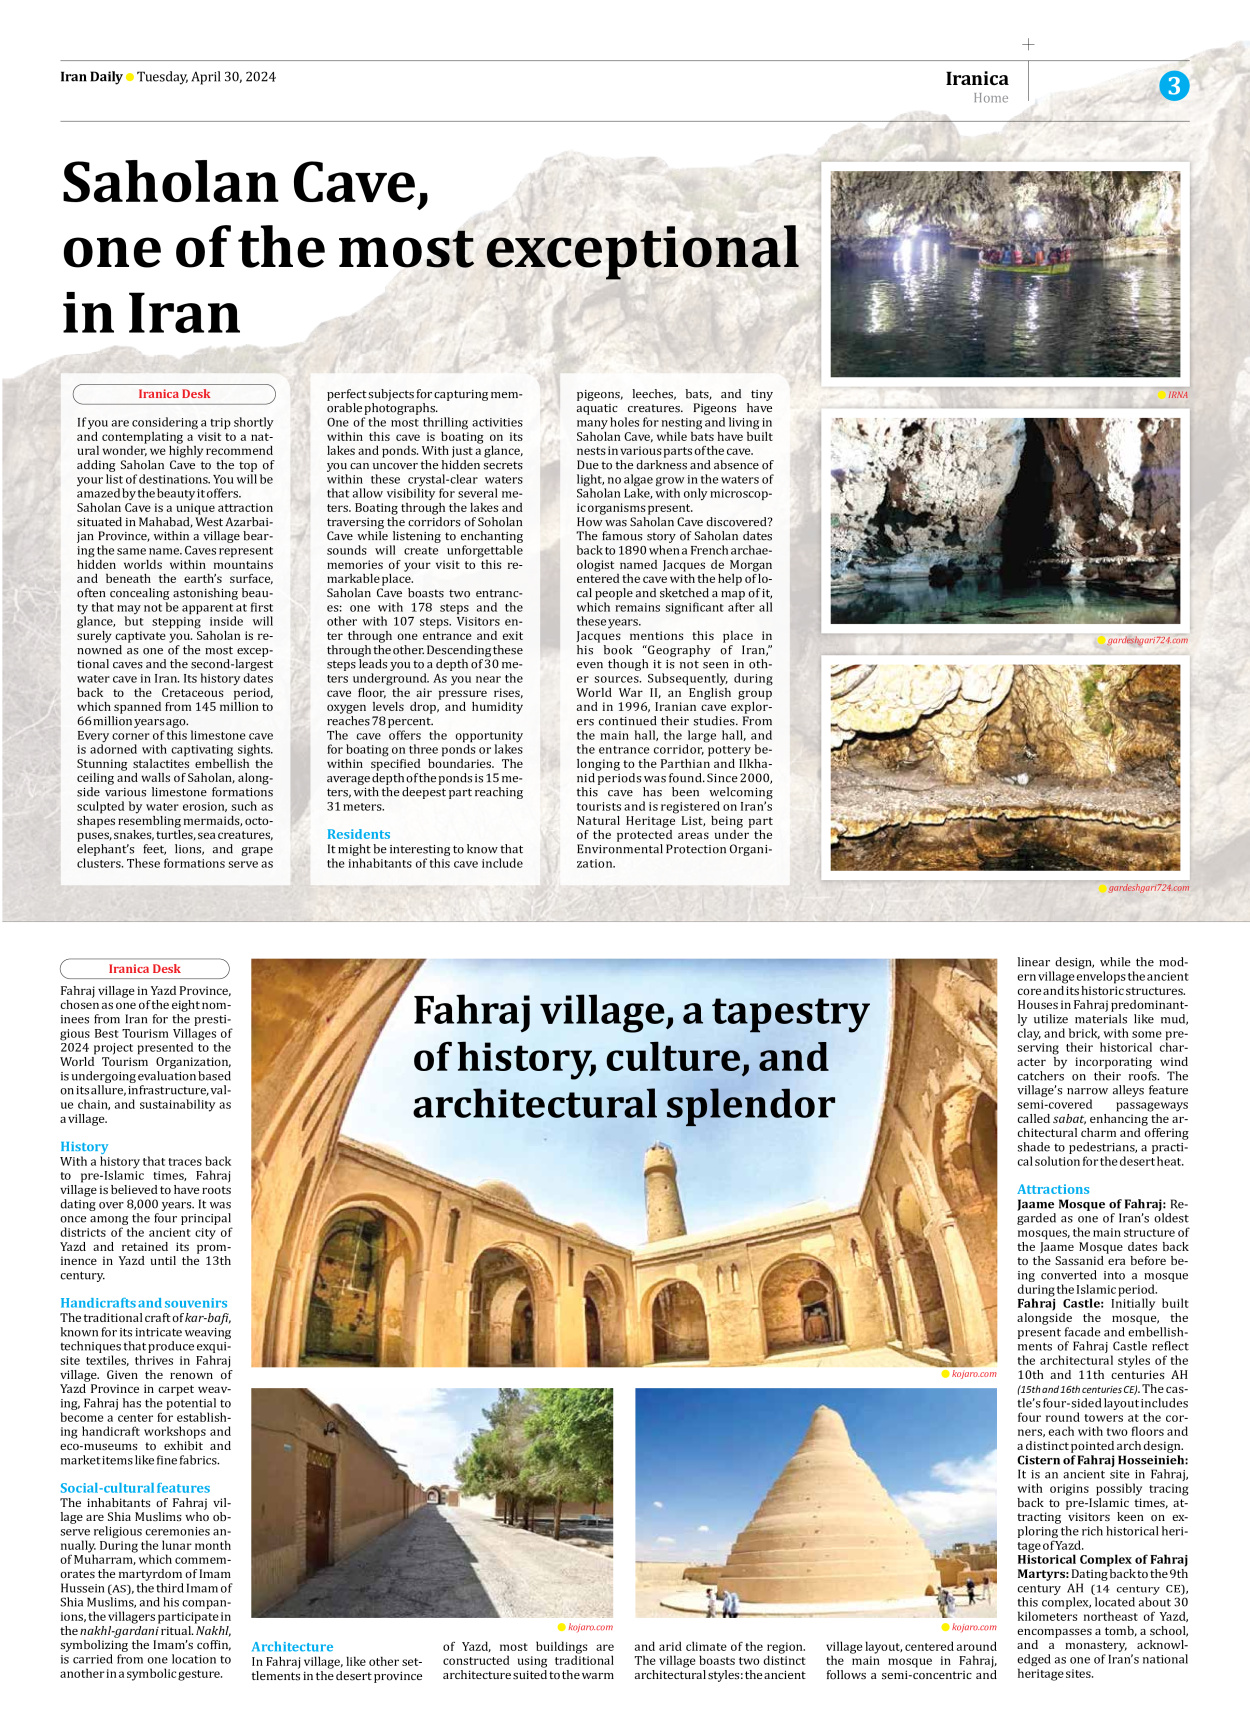 Iran Daily - Number Seven Thousand Five Hundred and Forty Six - 30 April 2024 - Page 3